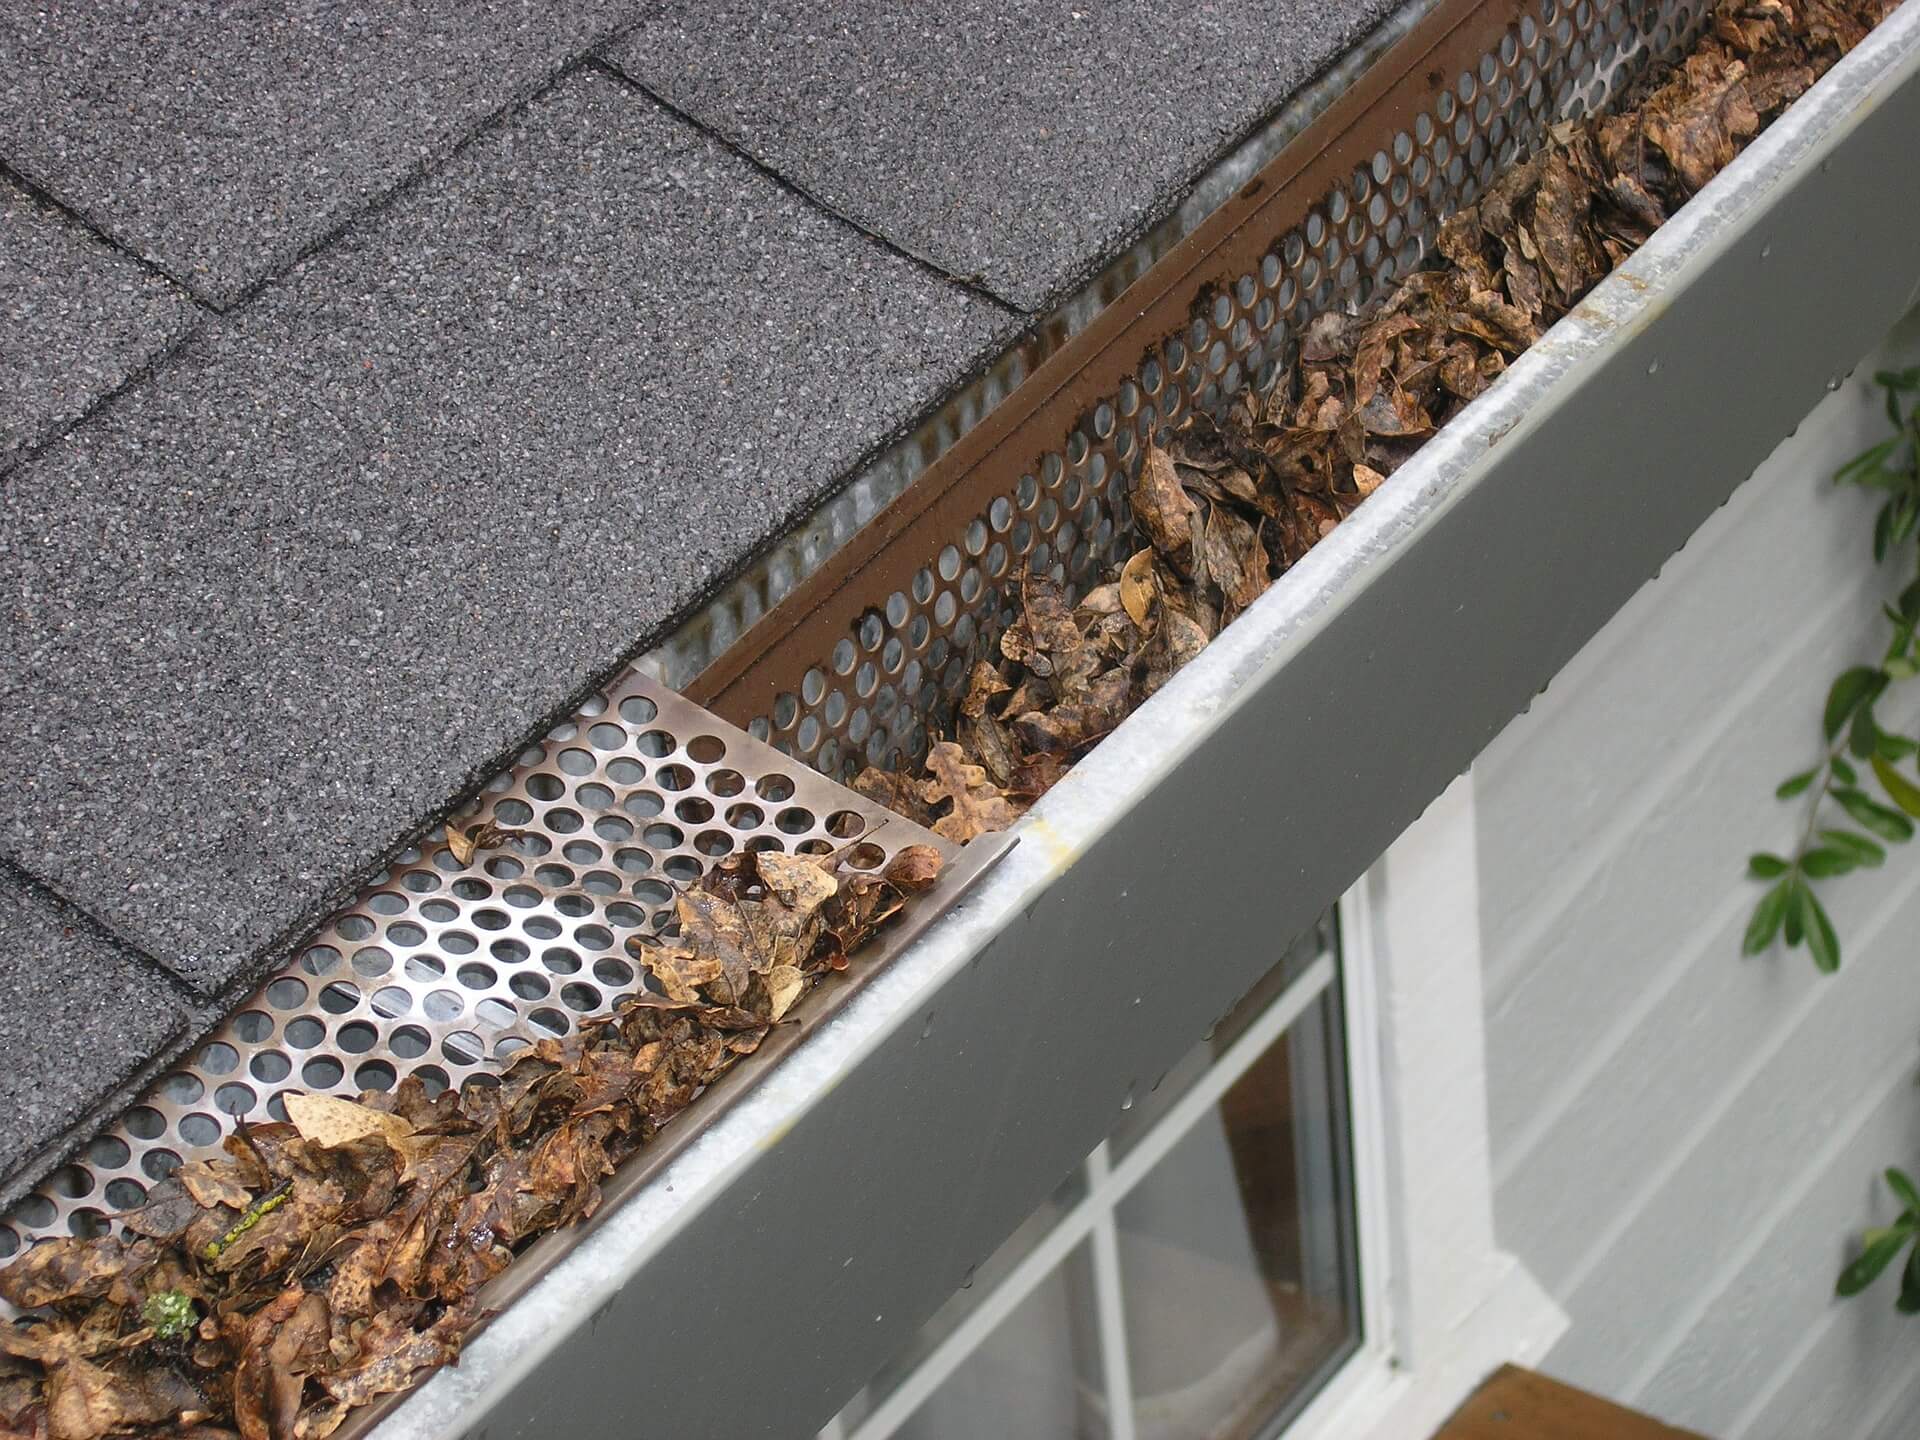 Leaves inside gutter, the gutter has old brown rusted gutter guards.